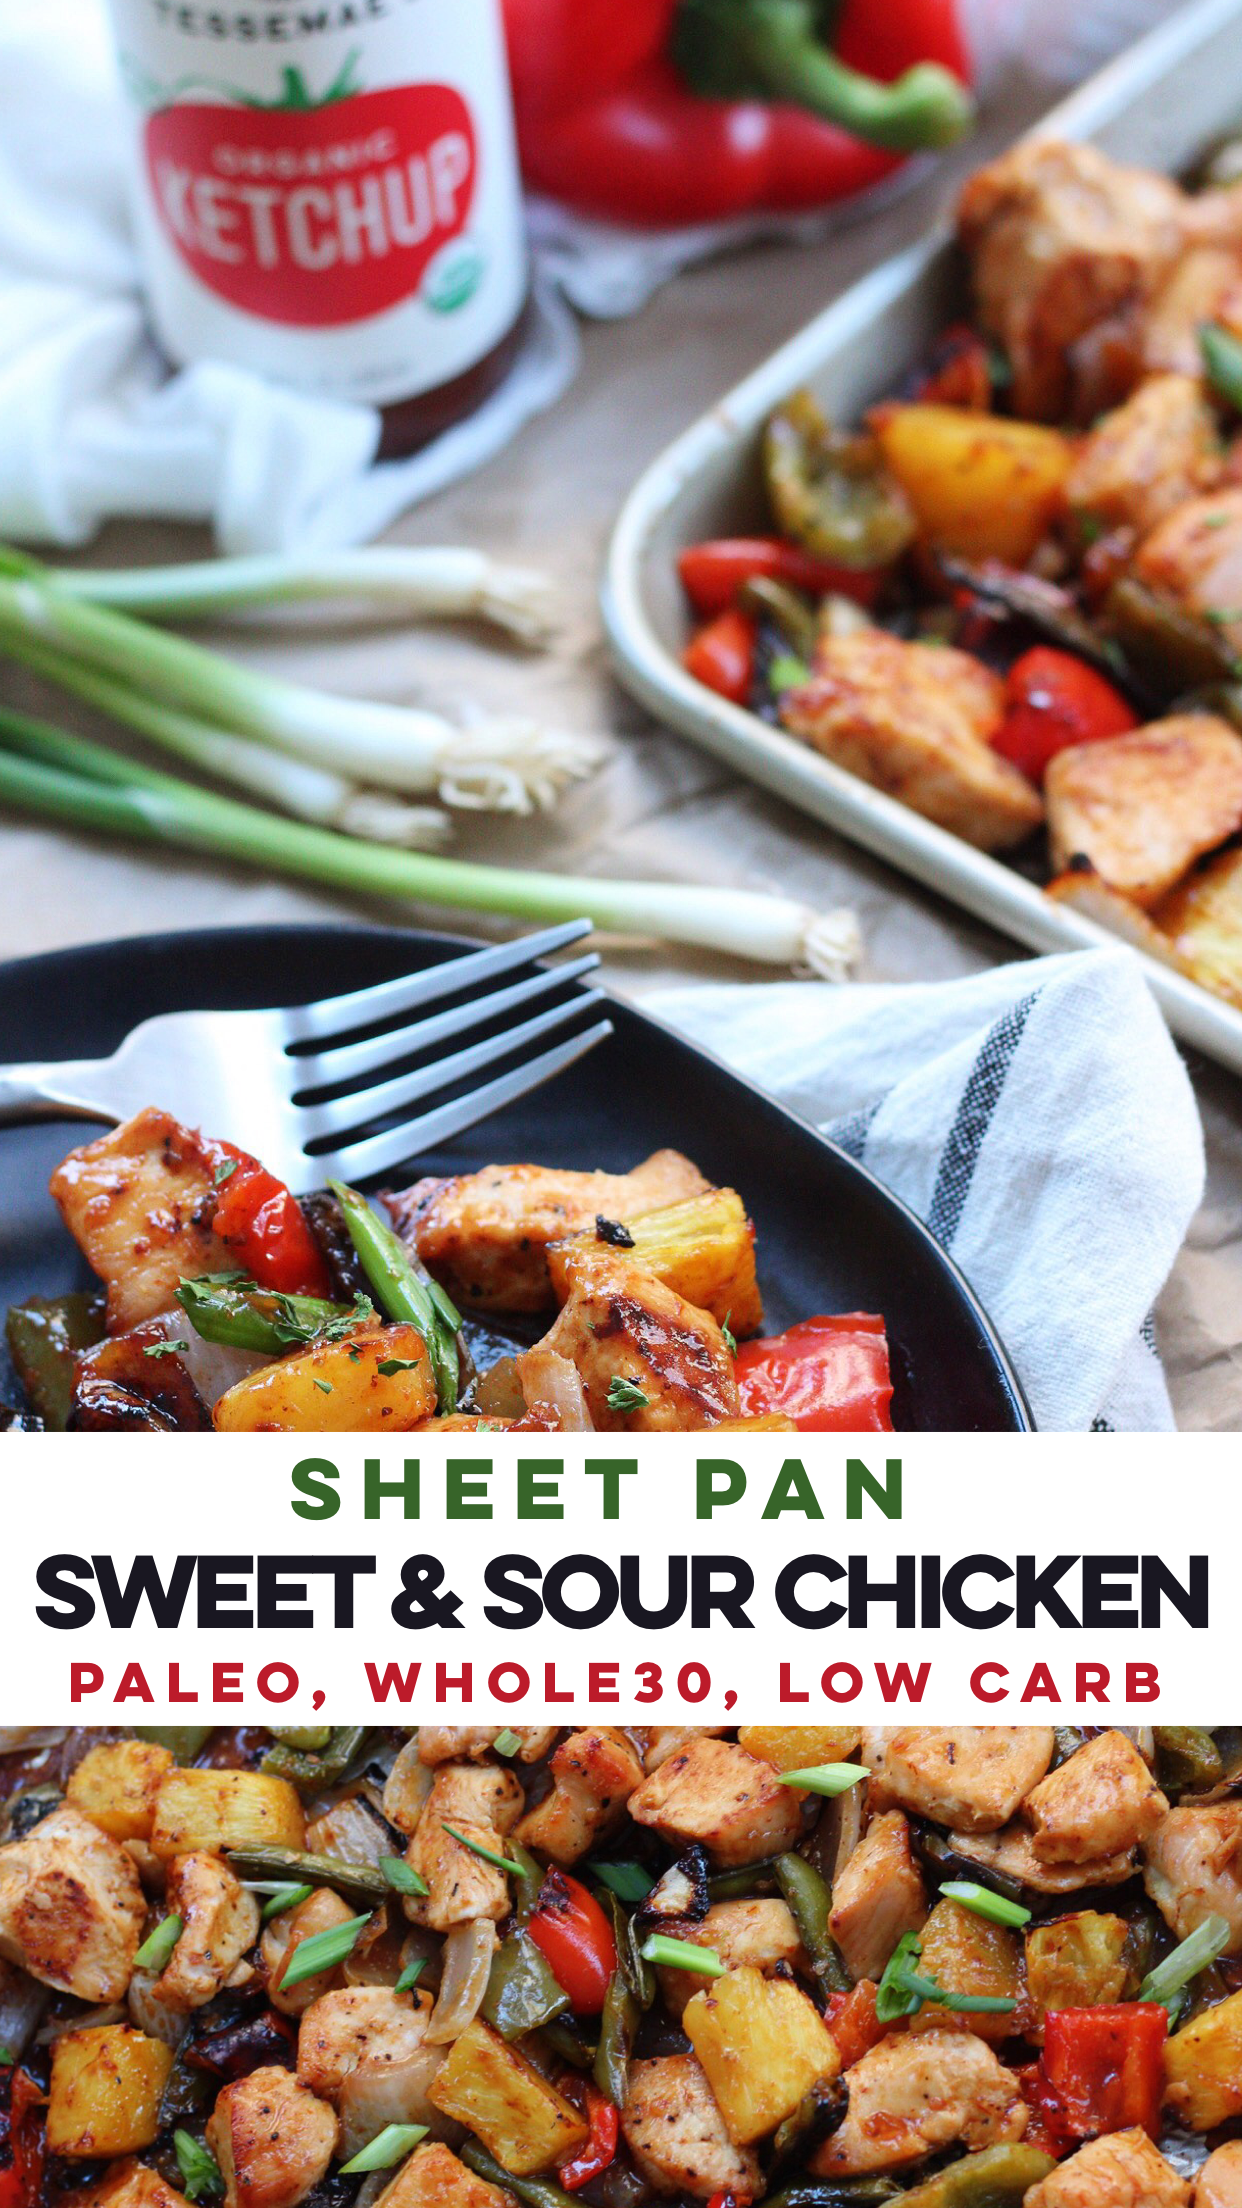 Easy & healthy sheet pan sweet and sour chicken is perfect for a busy week night or Paleo meal prep! #paleo #sweetandsour #whole30 #lowcarb #sheetpan via @paleobailey